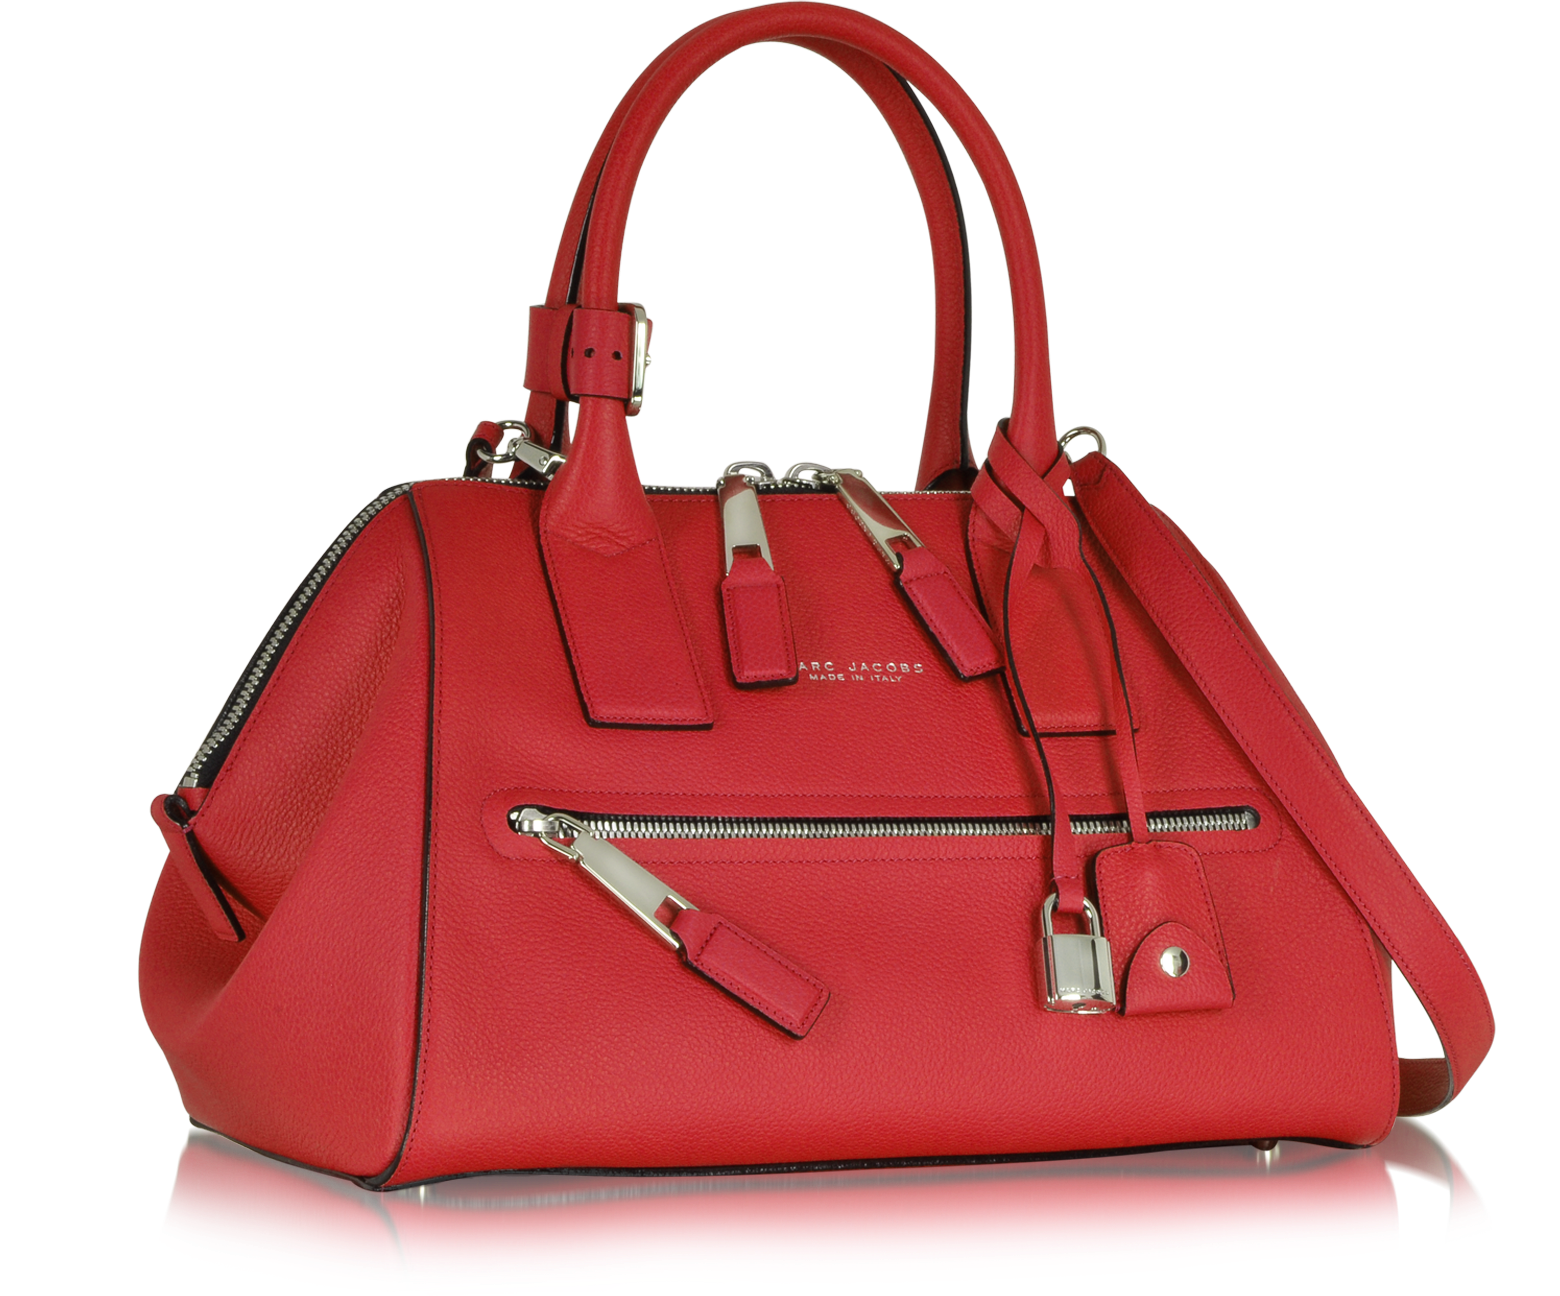 Marc Jacobs Textured Small Incognito Scarlet Leather Satchel at FORZIERI